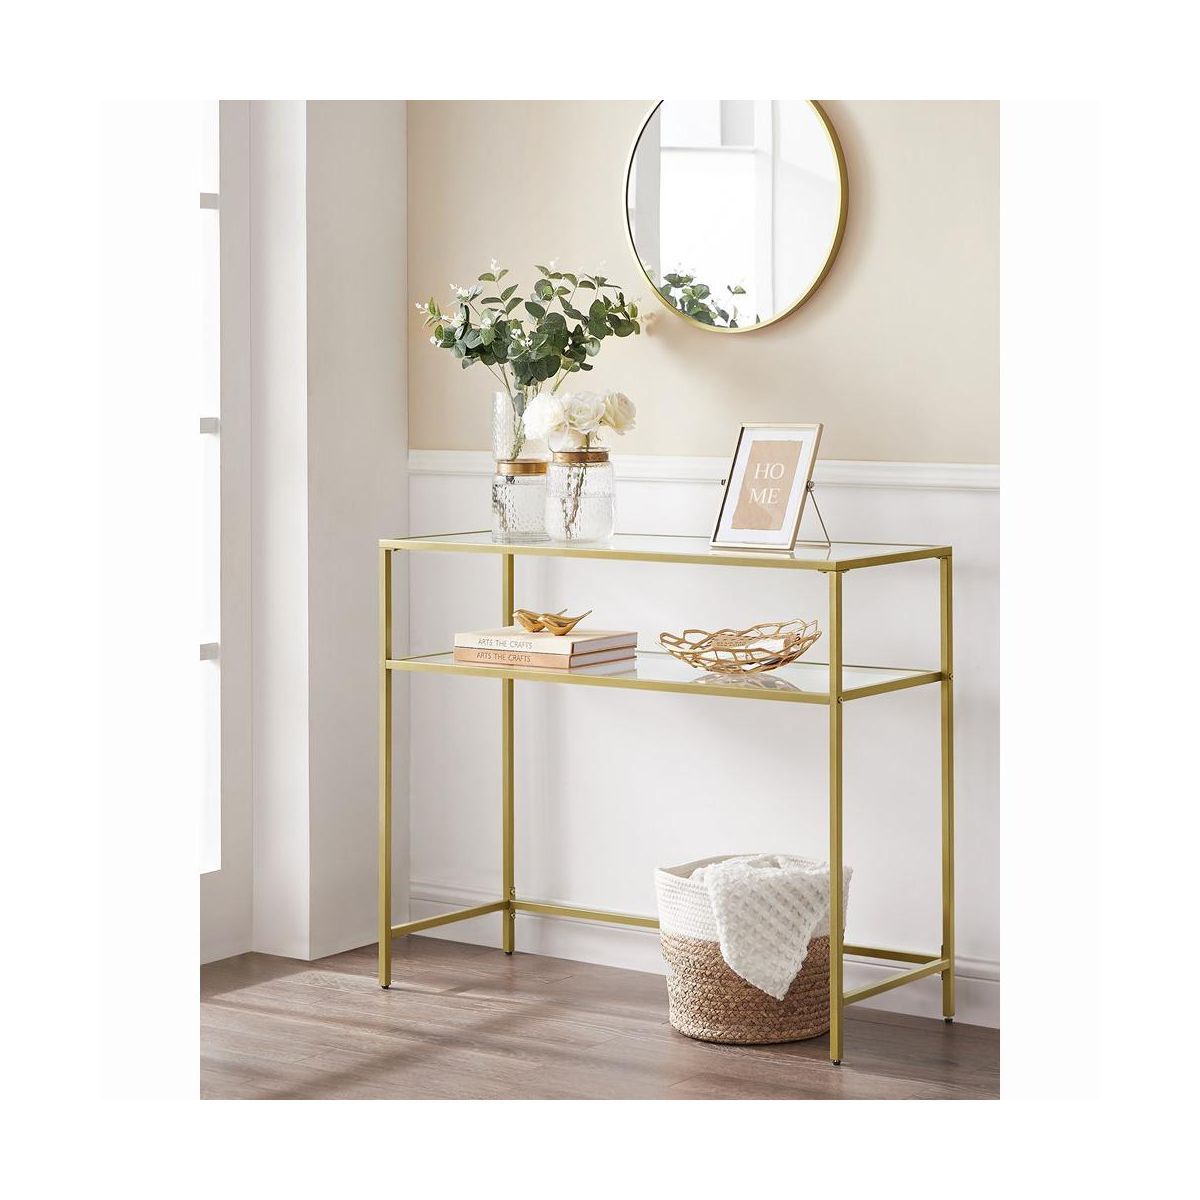 VASAGLE Console Sofa Table, Modern Entryway Table, Tempered Glass Table, Metal Frame | Target